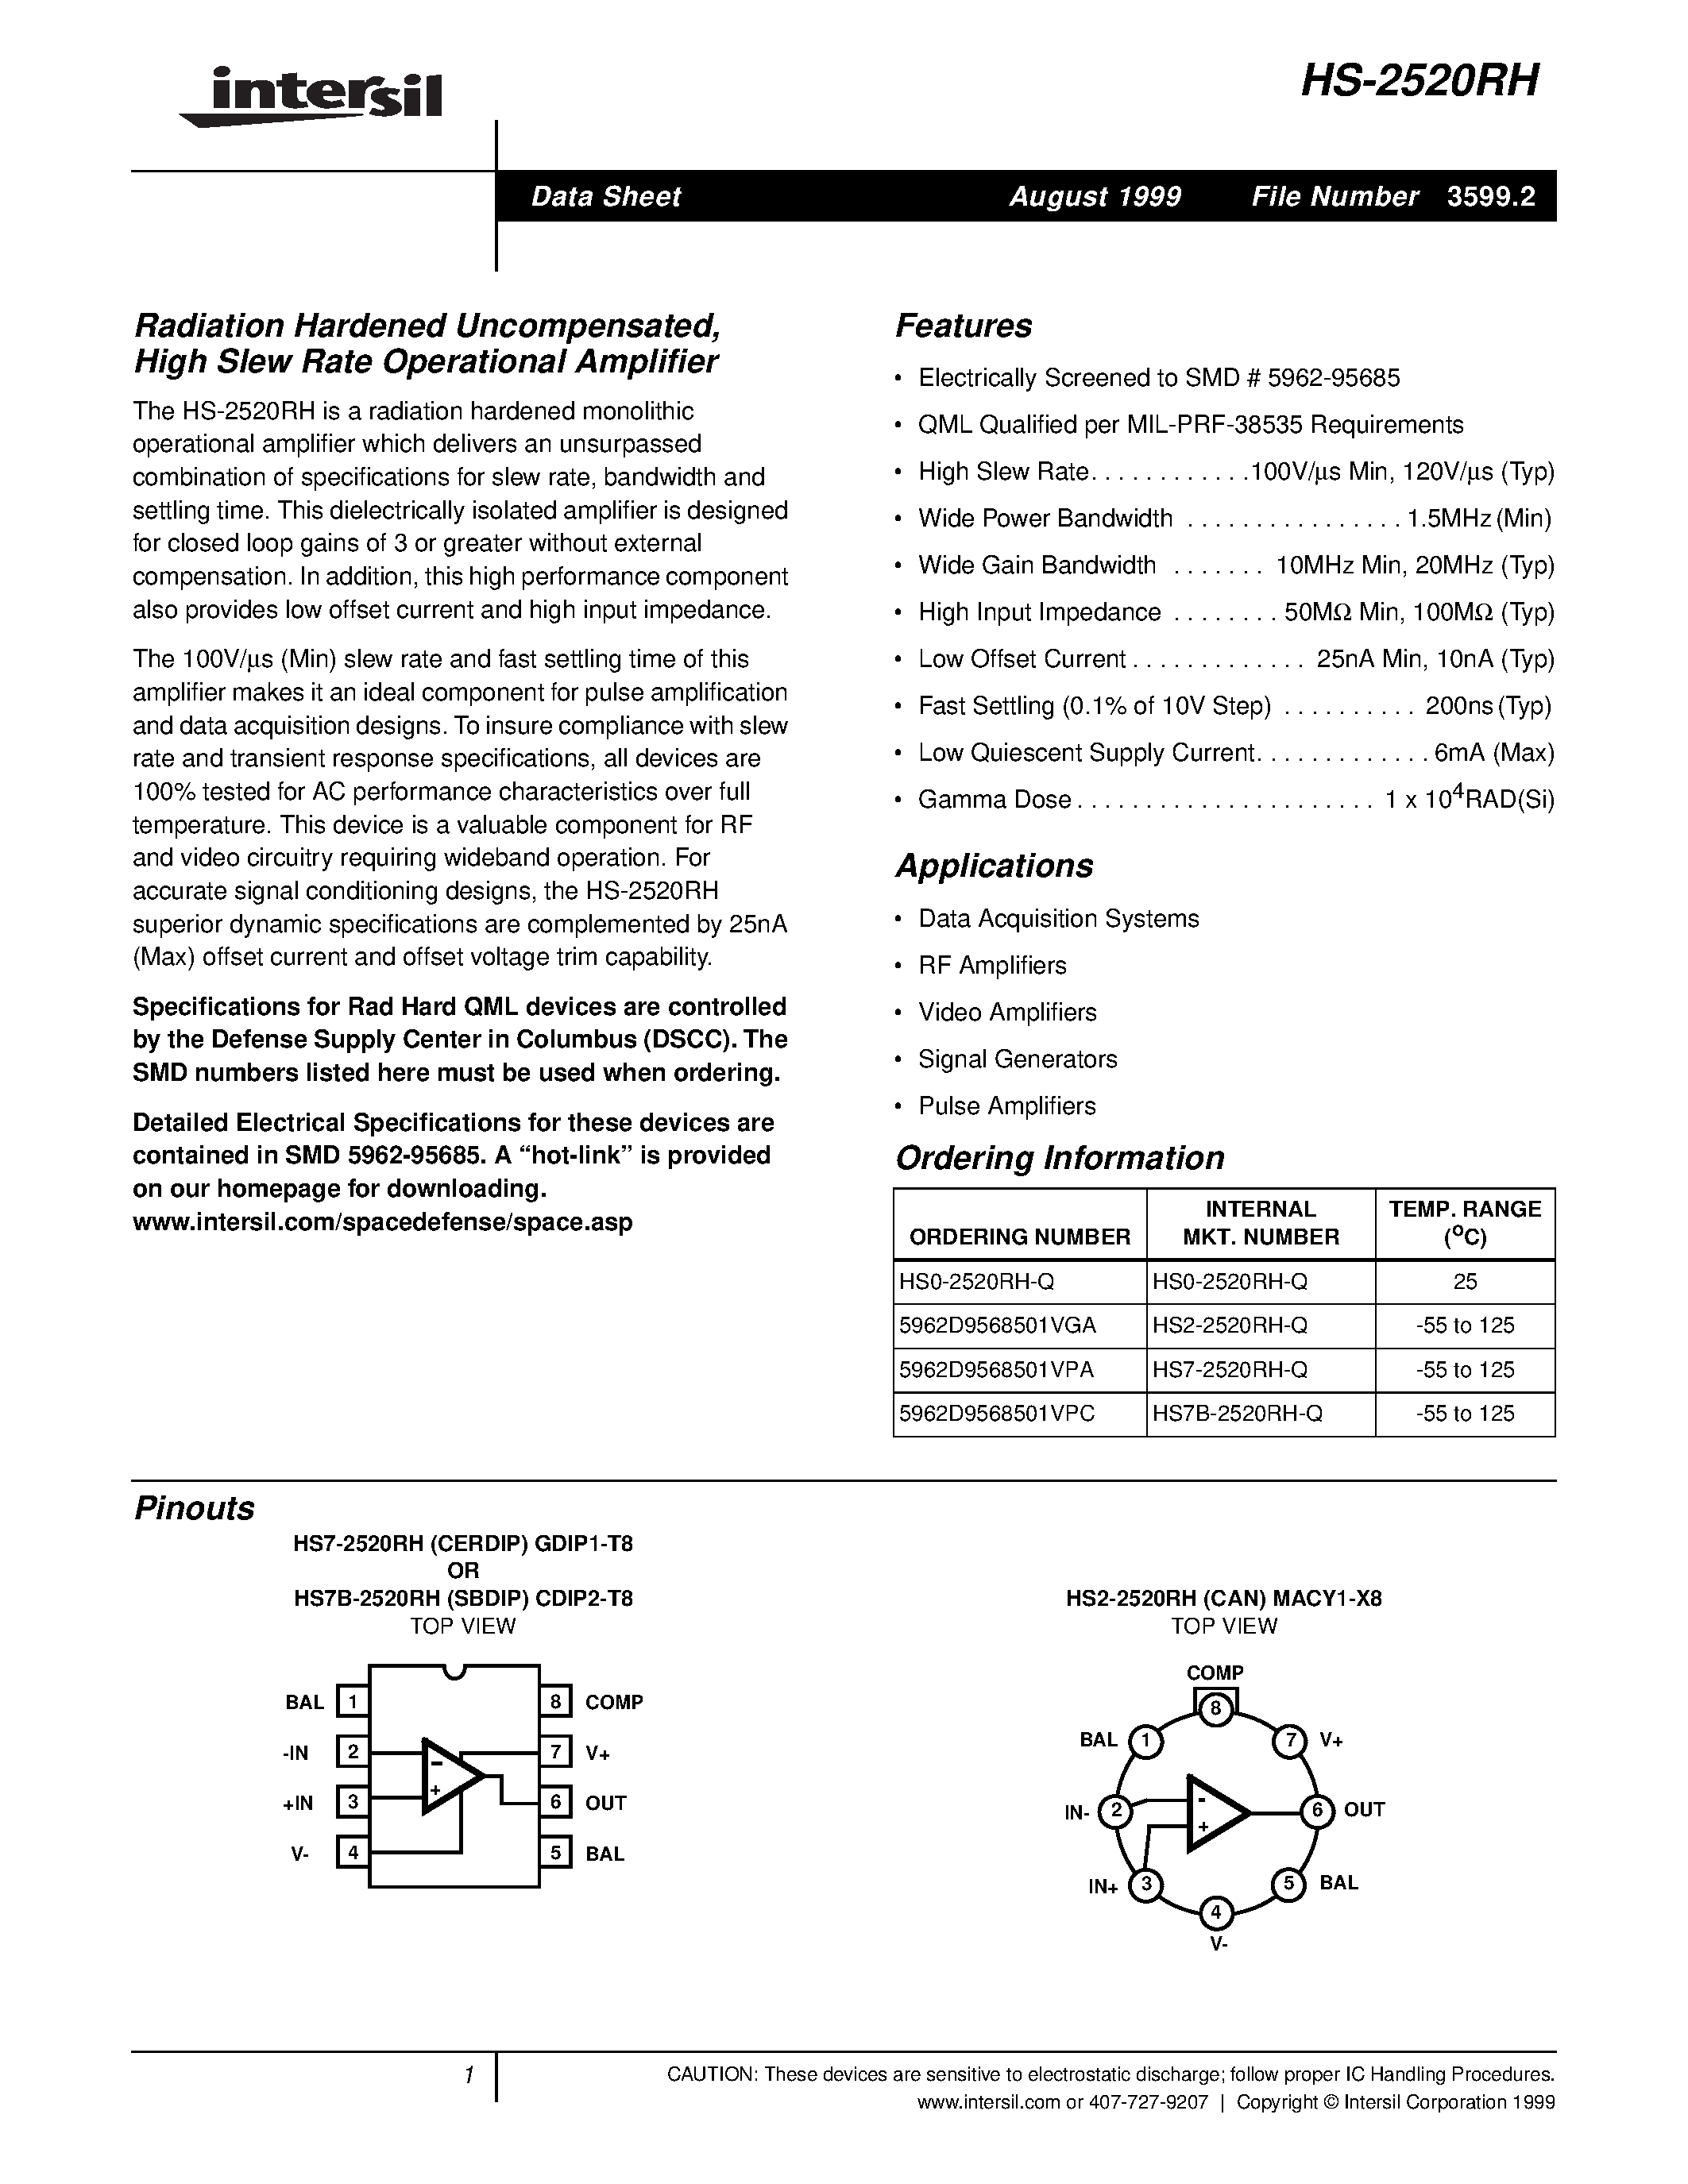 Datasheet HS2-2520RH-Q - Radiation Hardened Uncompensated/ High Slew Rate Operational Amplifier page 1